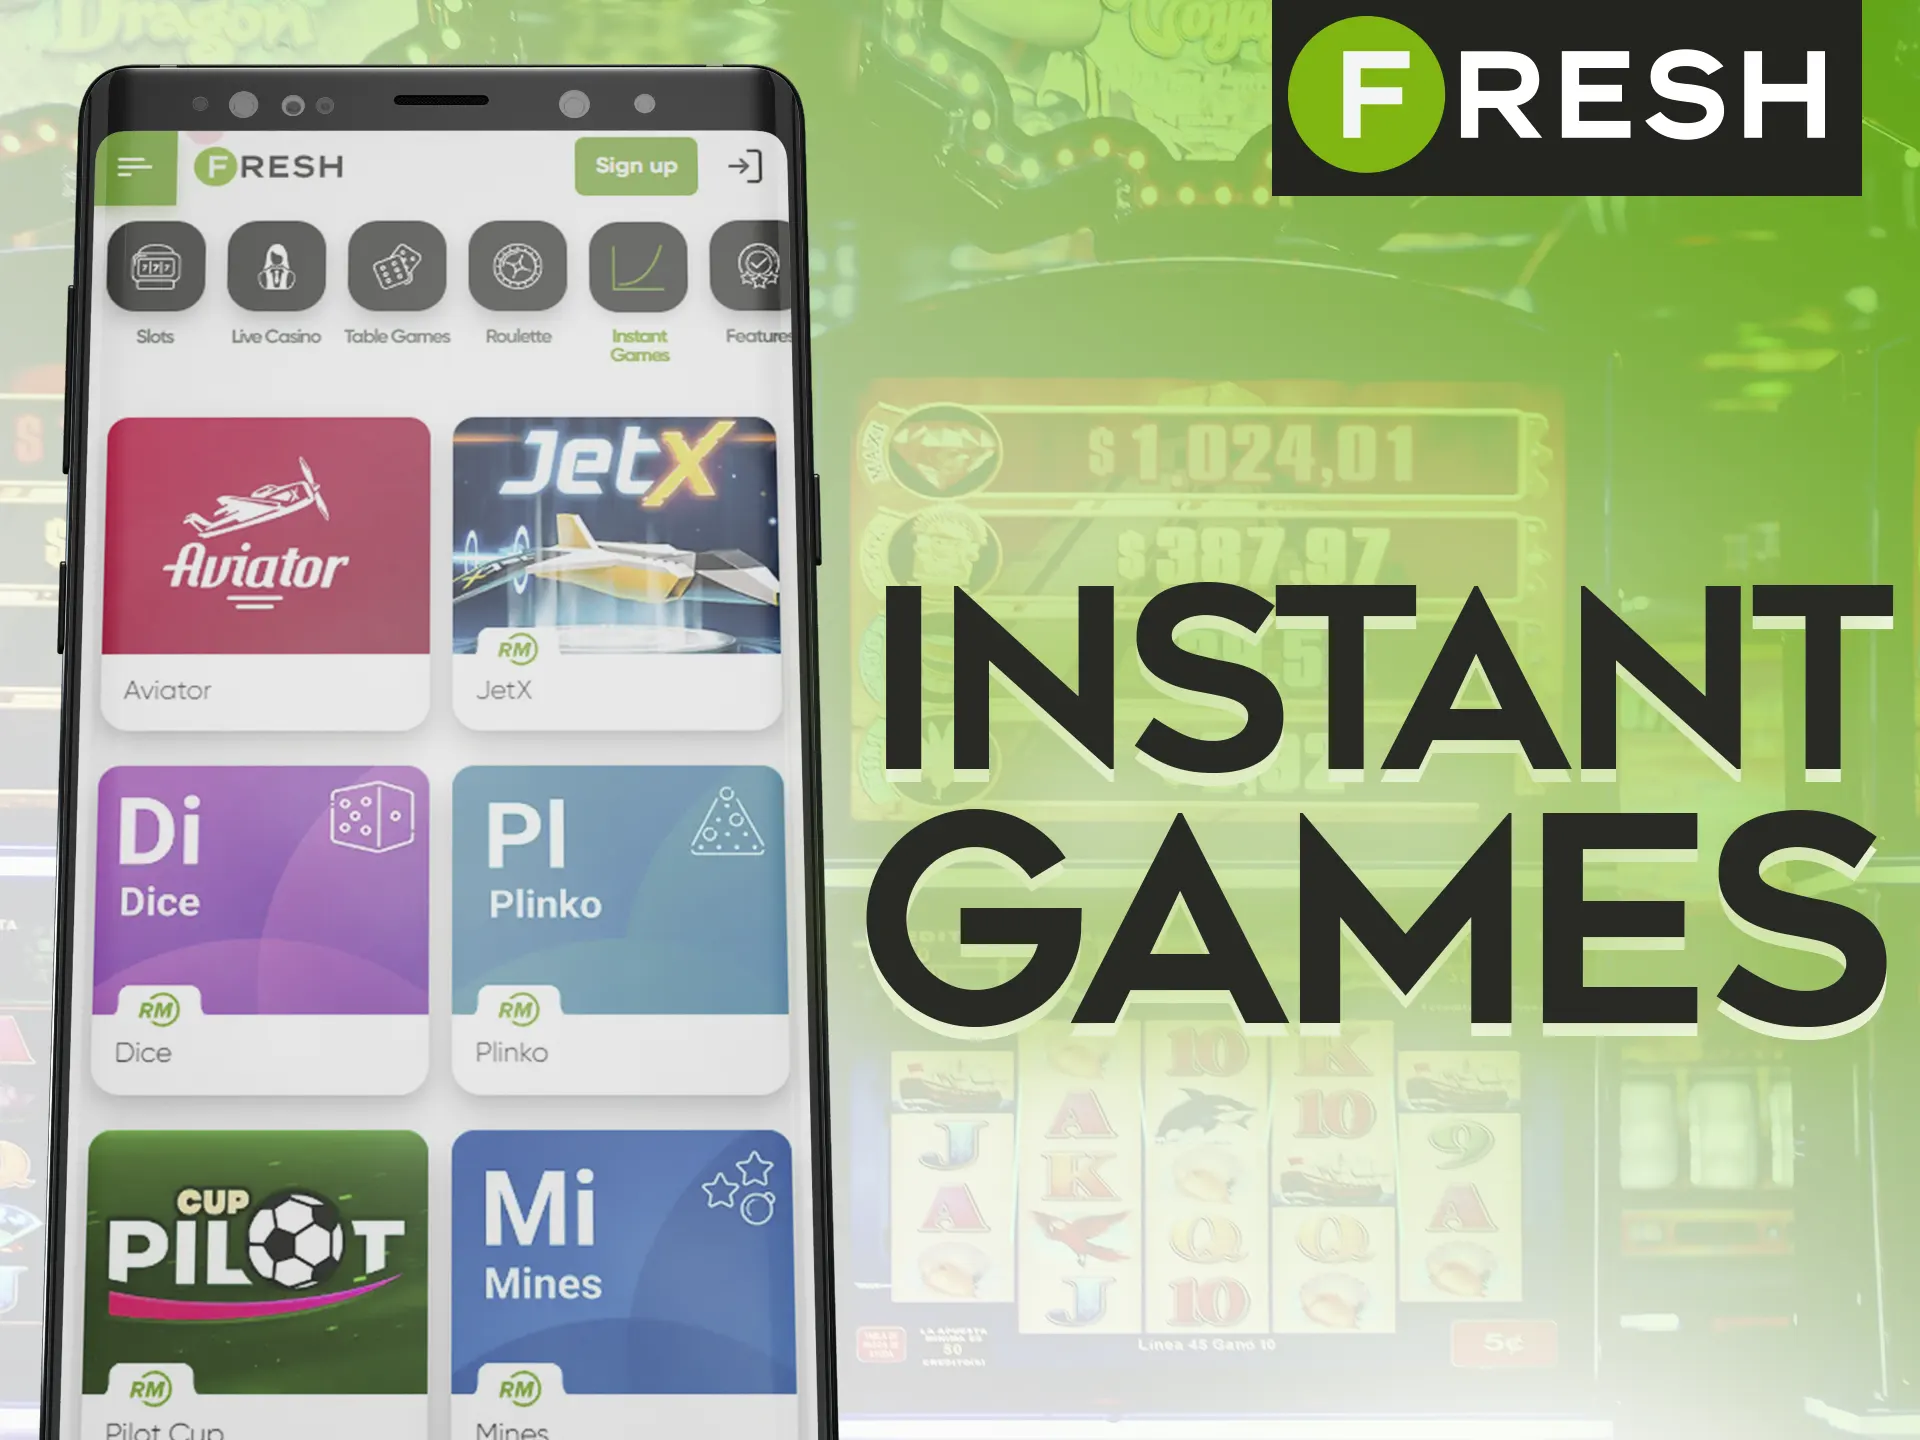 Have fun by playing Fresh Casino instant games in the app.